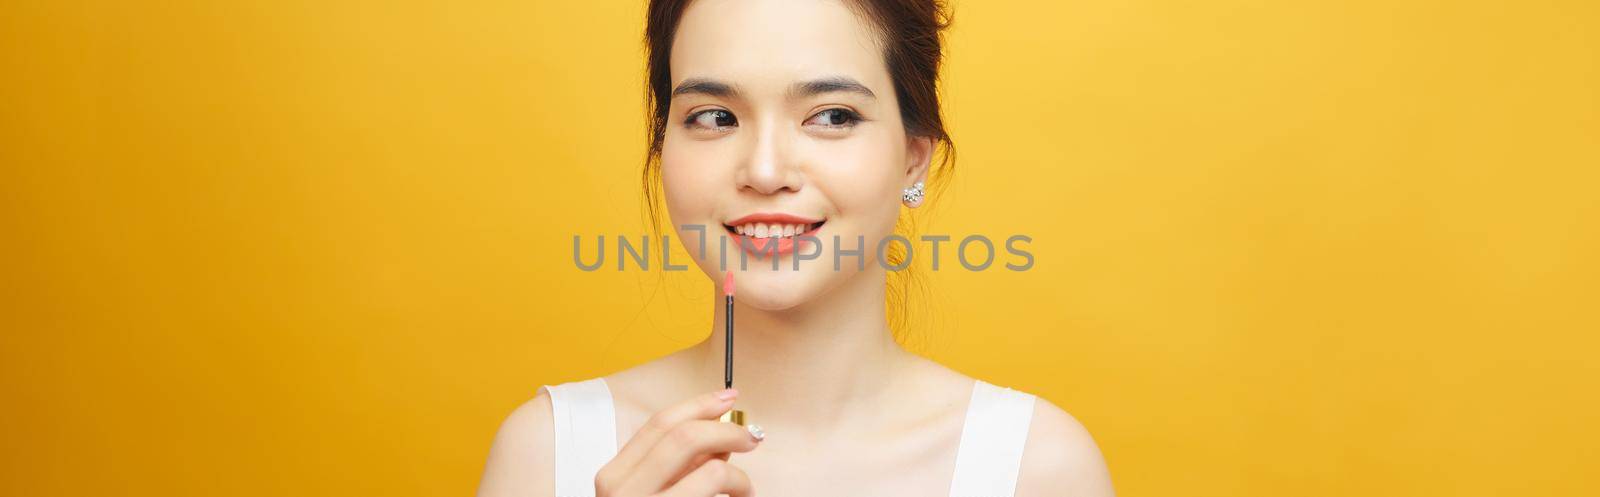 Perfect girl holding lipstick on yellow background, close up portrait.